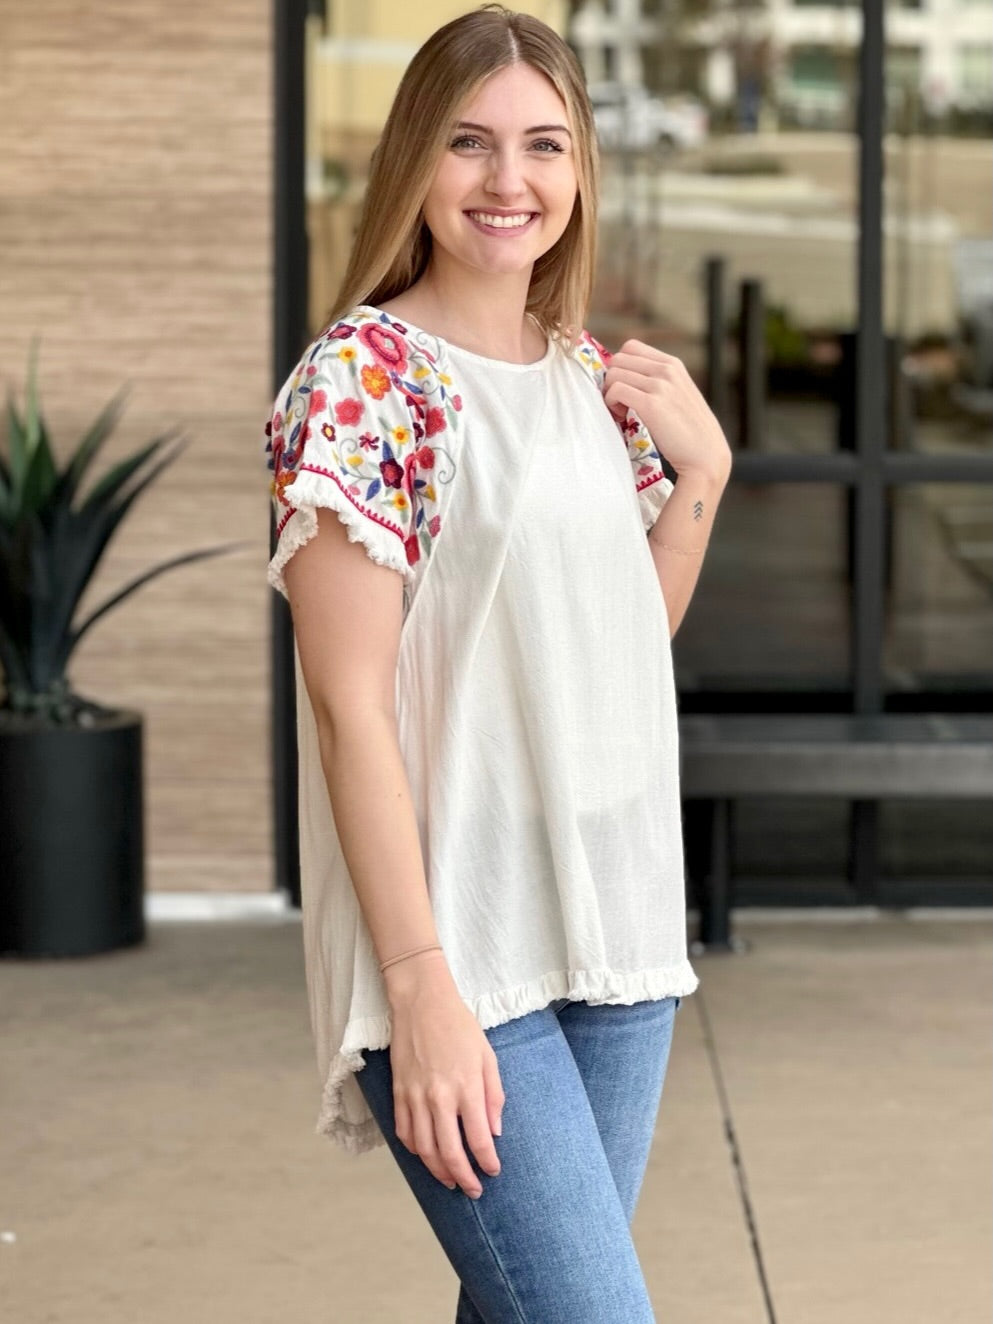 Lexi in off white top side view holding sleeve